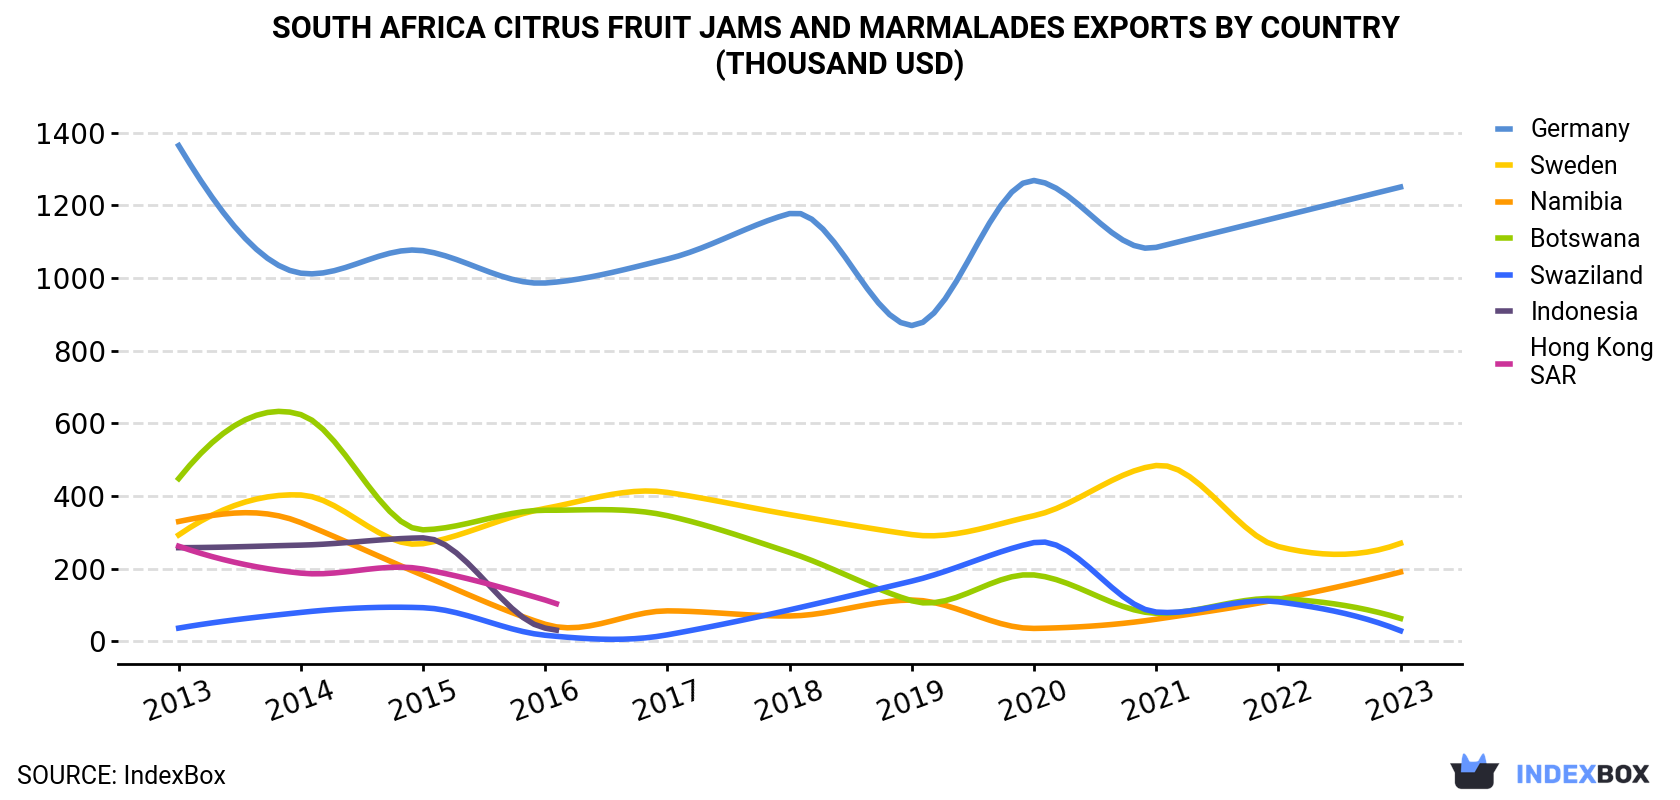 South Africa Citrus Fruit Jams and Marmalades Exports By Country (Thousand USD)